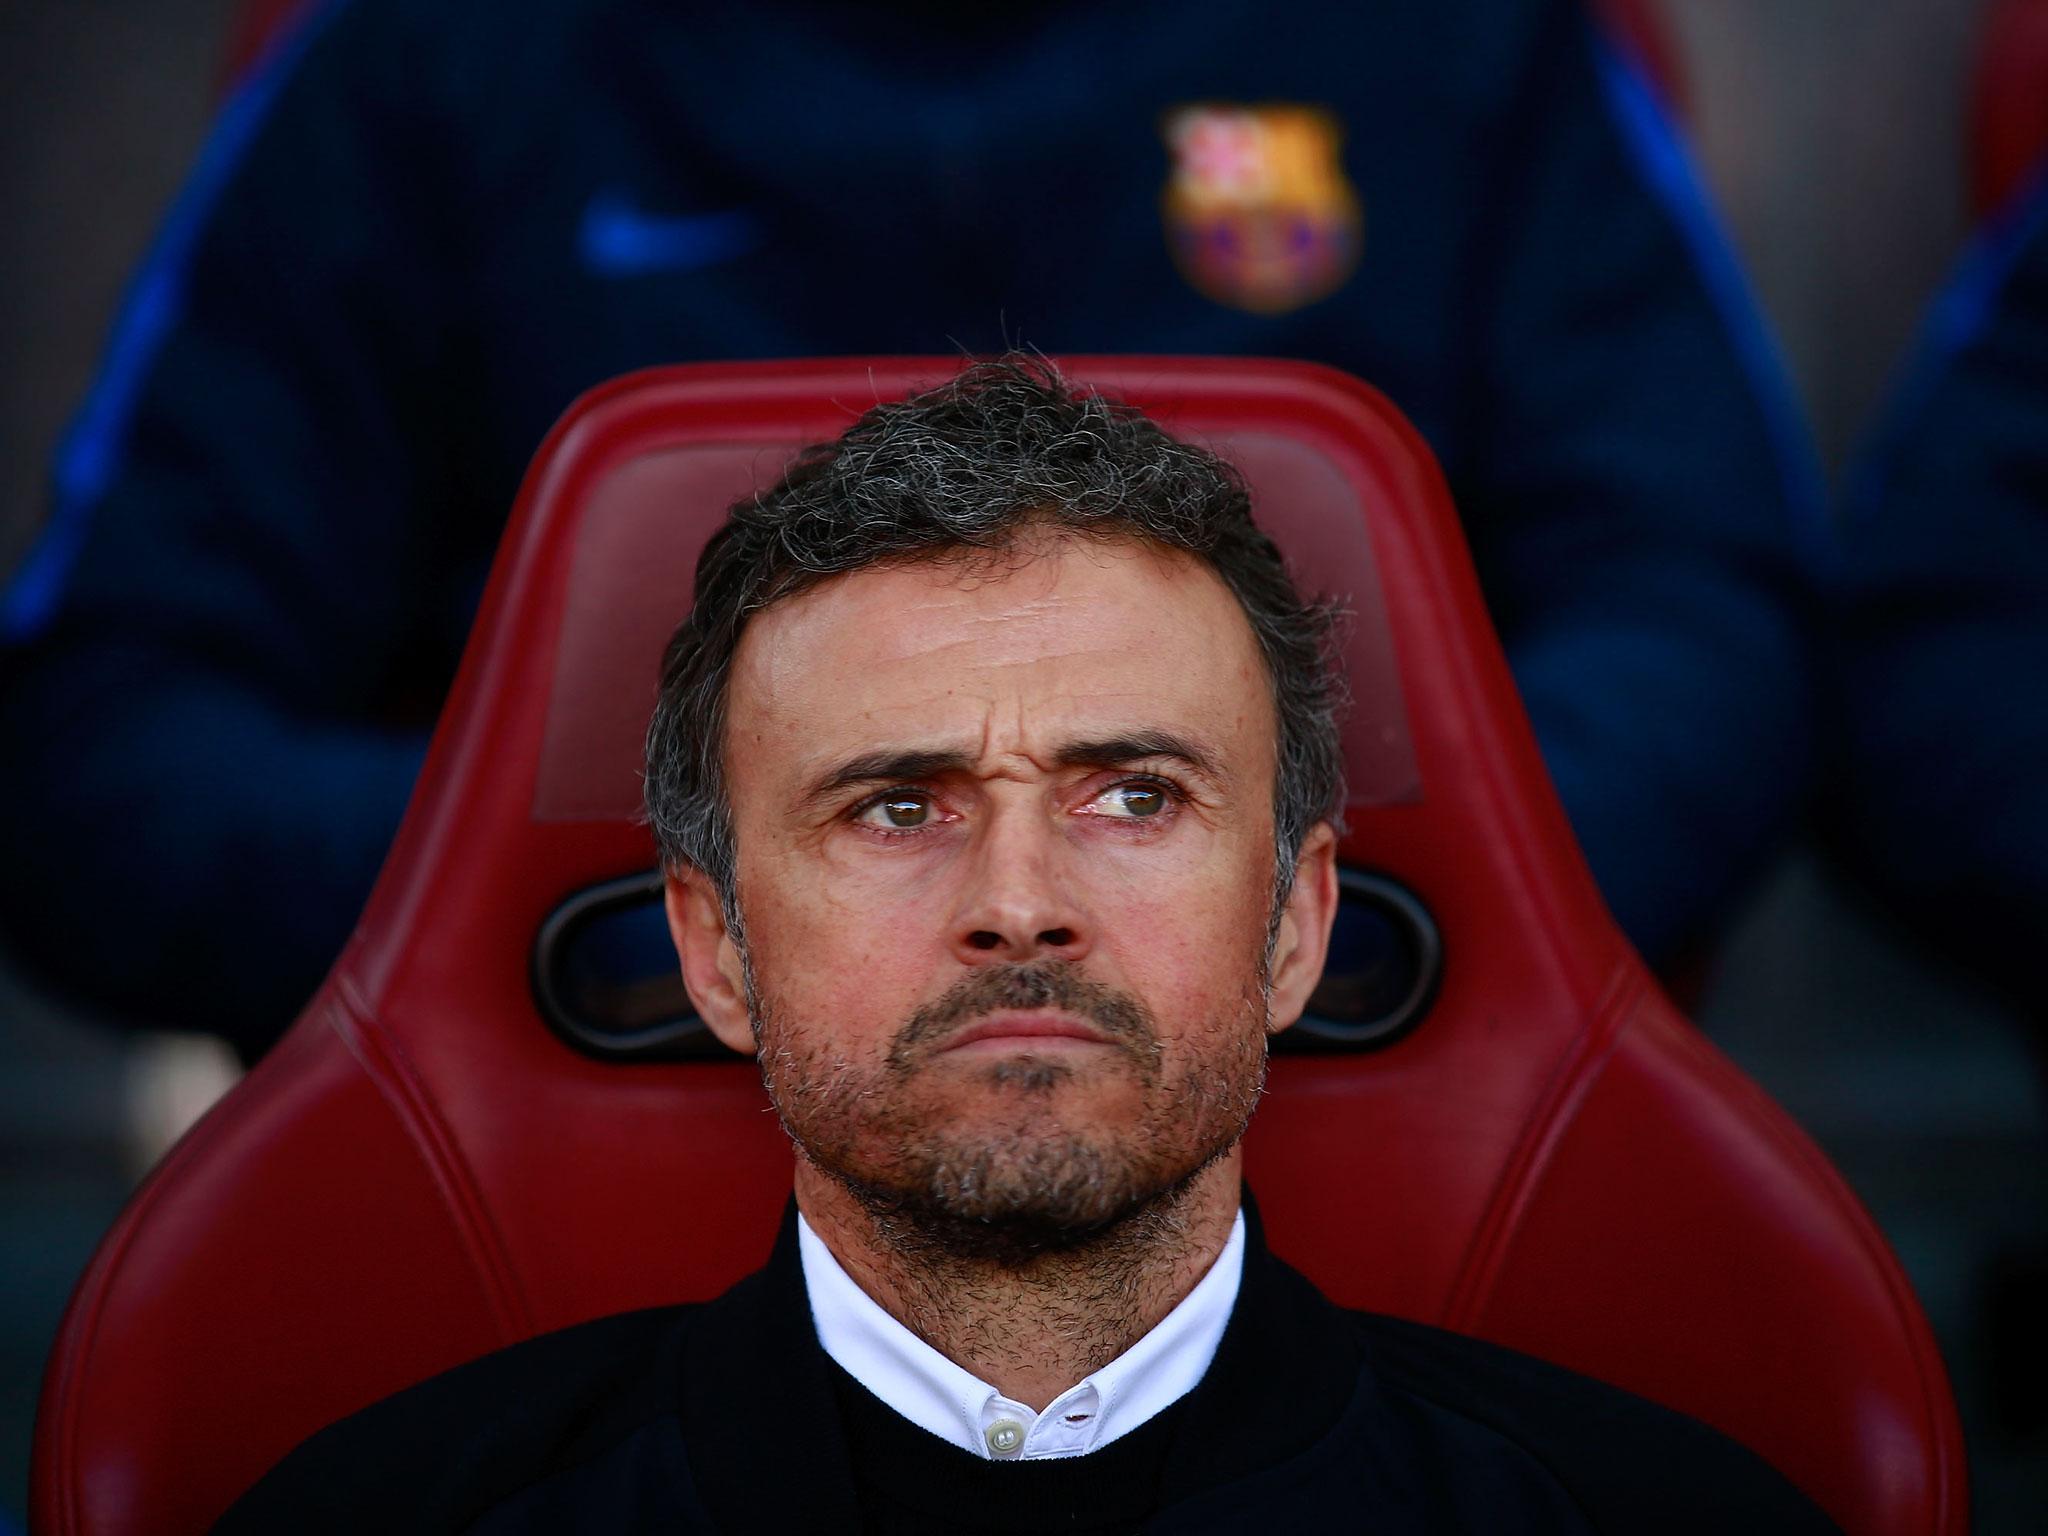 Luis Enrique's time at the Catalan club has come to an end after three years